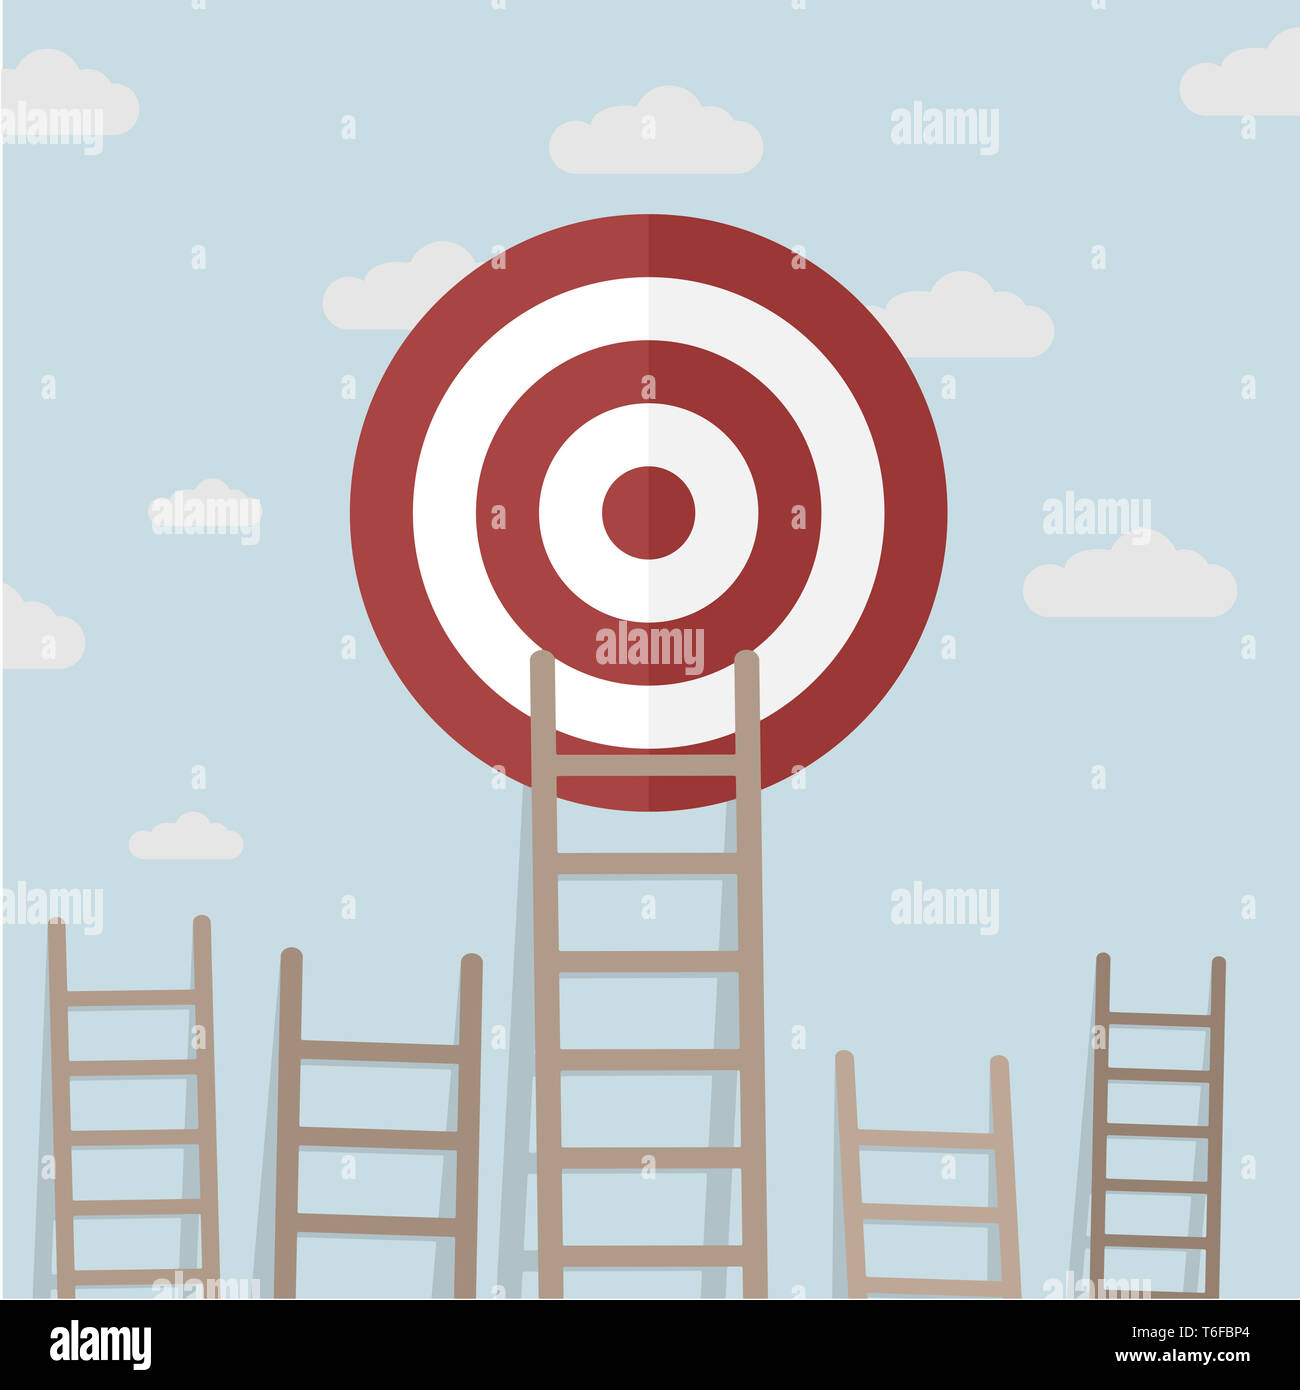 Ladder Target Clouds Stock Photo